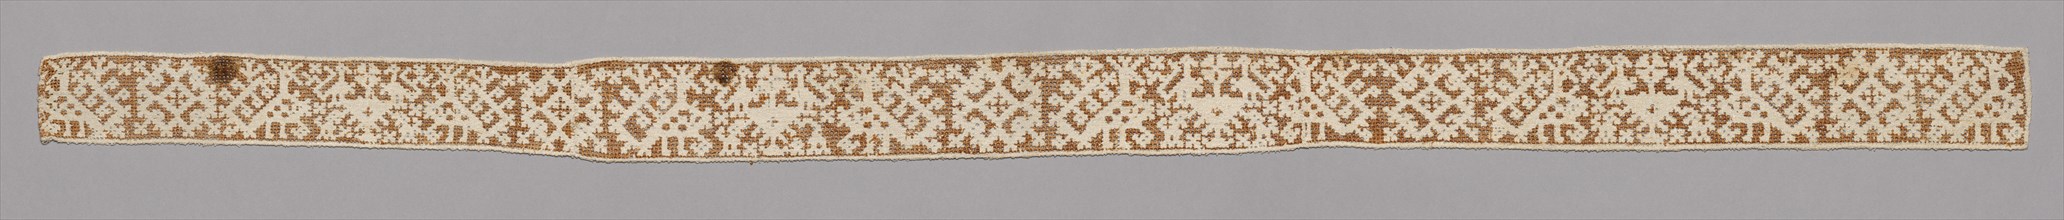 Needlepoint (Drawnwork) Lace Band, 16th-17th century. Creator: Unknown.